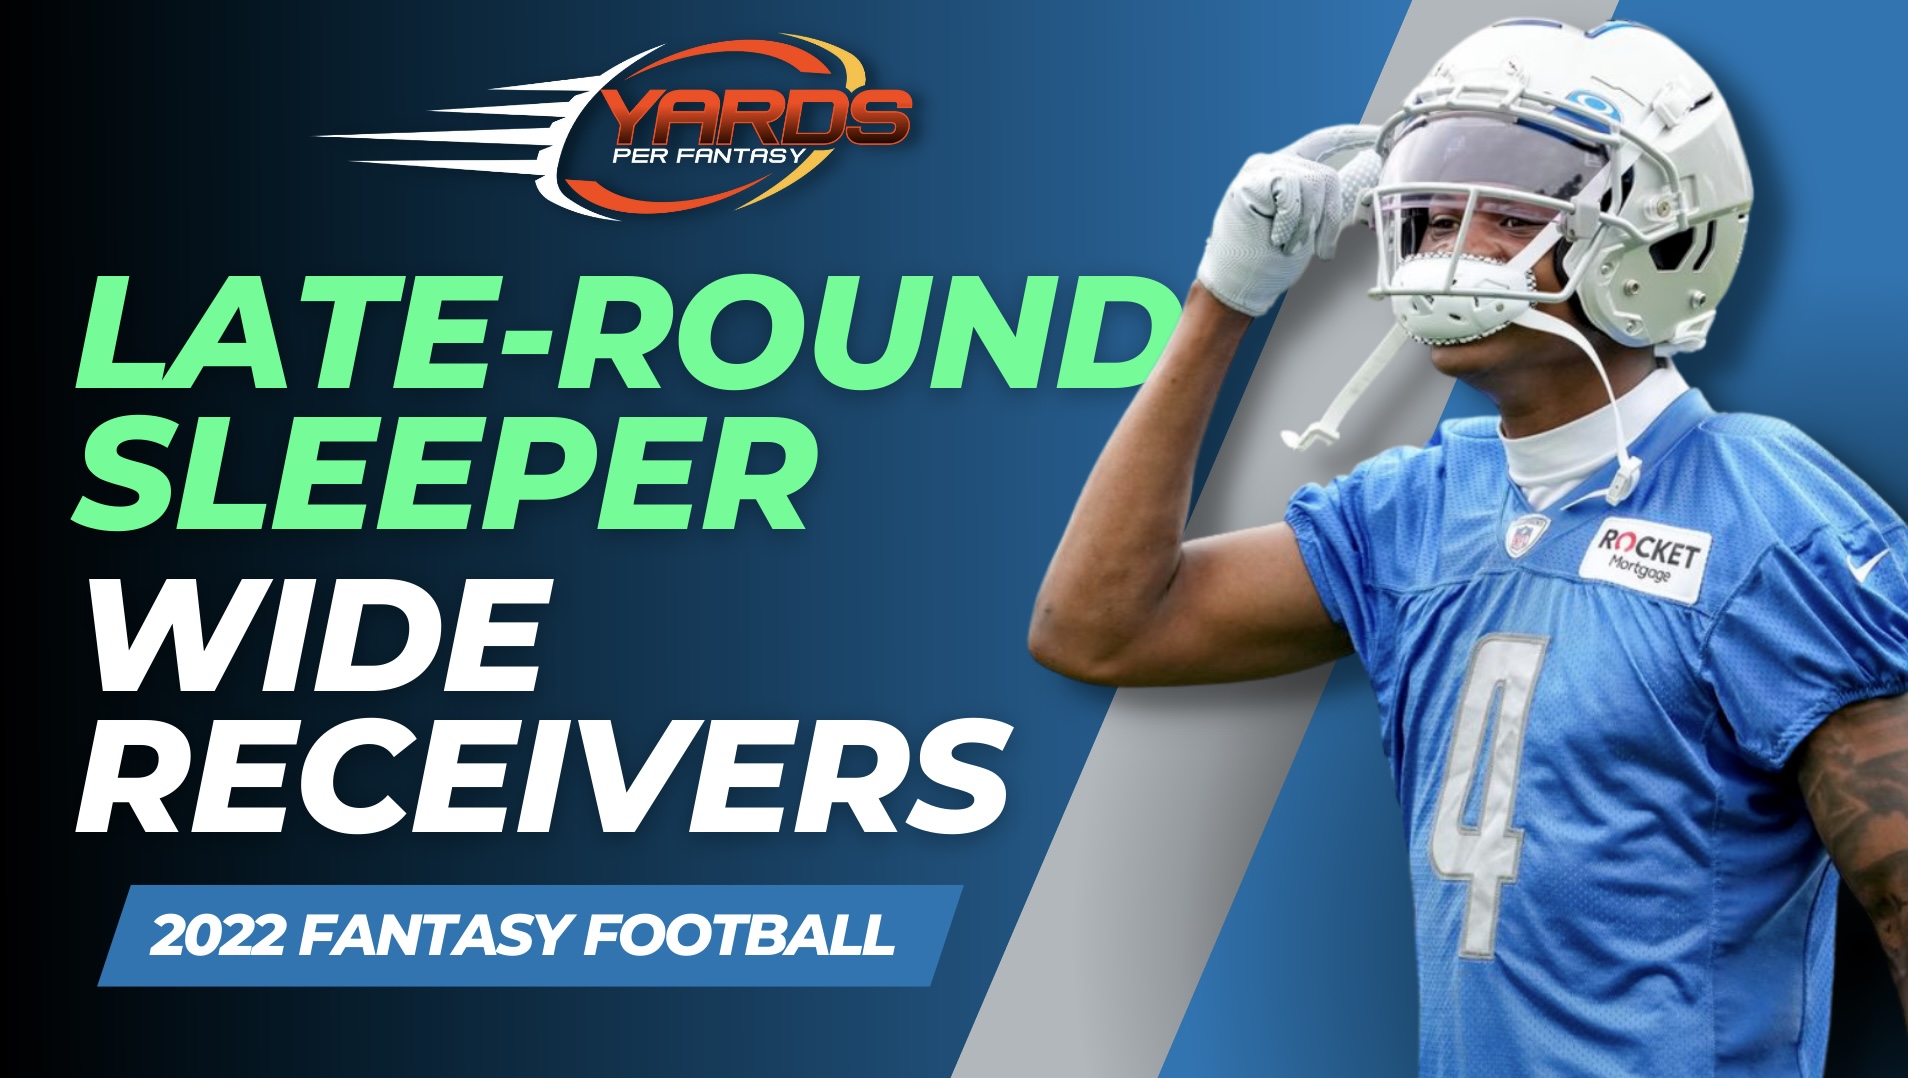 2022 Late Round Sleeper Wide Receivers In Fantasy Yards Per Fantasy